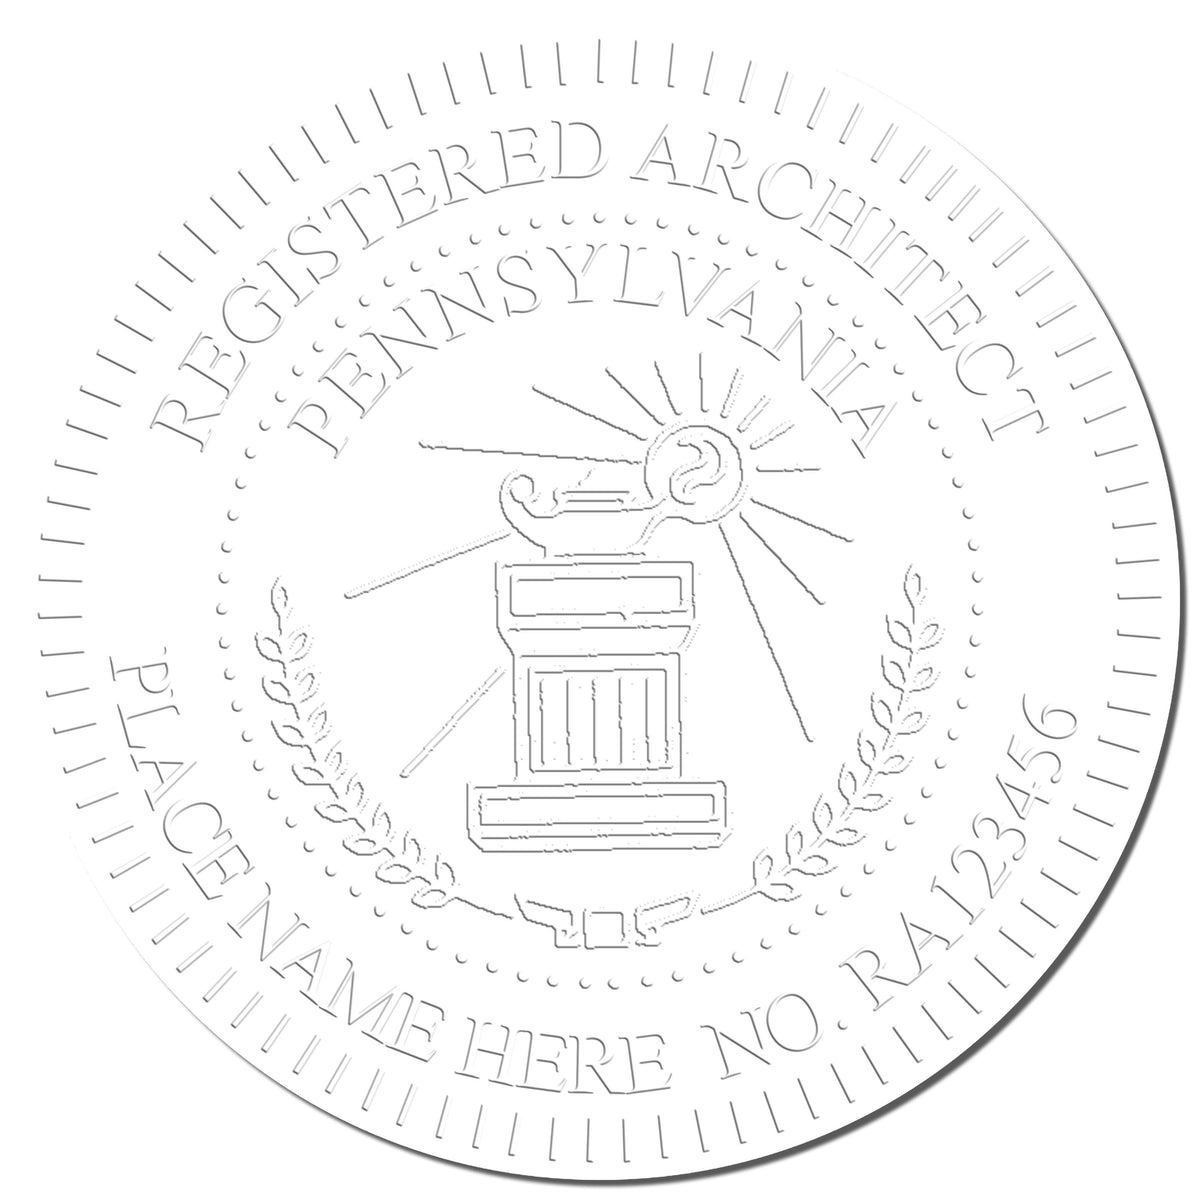 This paper is stamped with a sample imprint of the Gift Pennsylvania Architect Seal, signifying its quality and reliability.